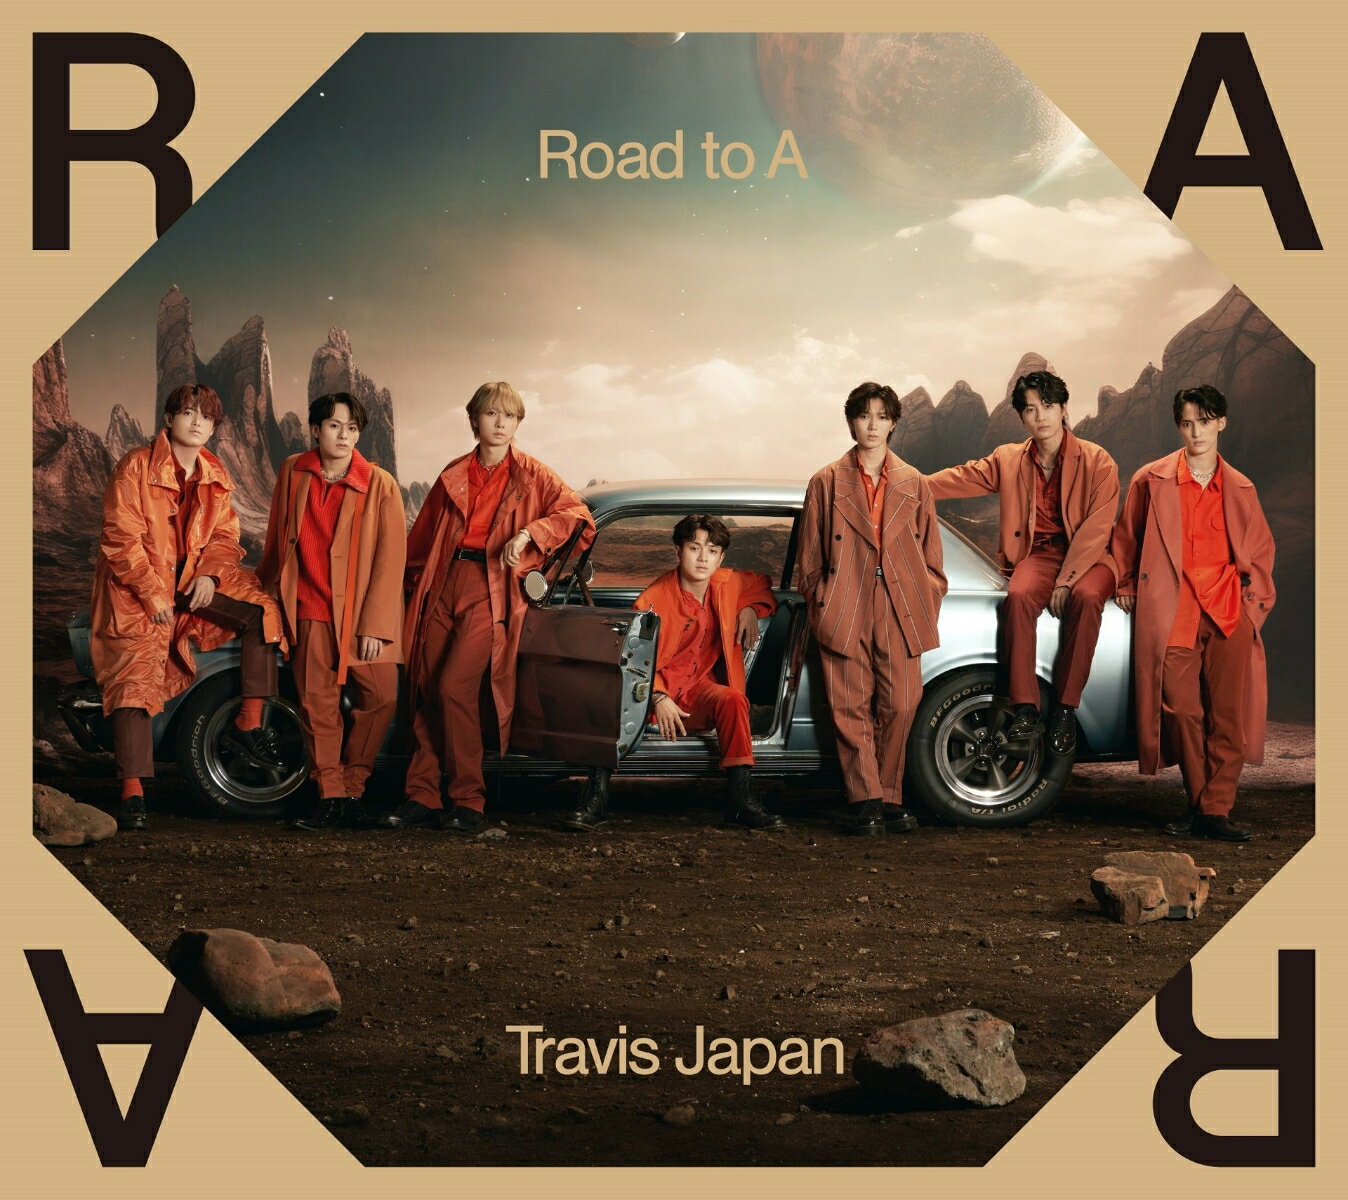 Road to A (初回J盤 CD＋CD) (特典なし)